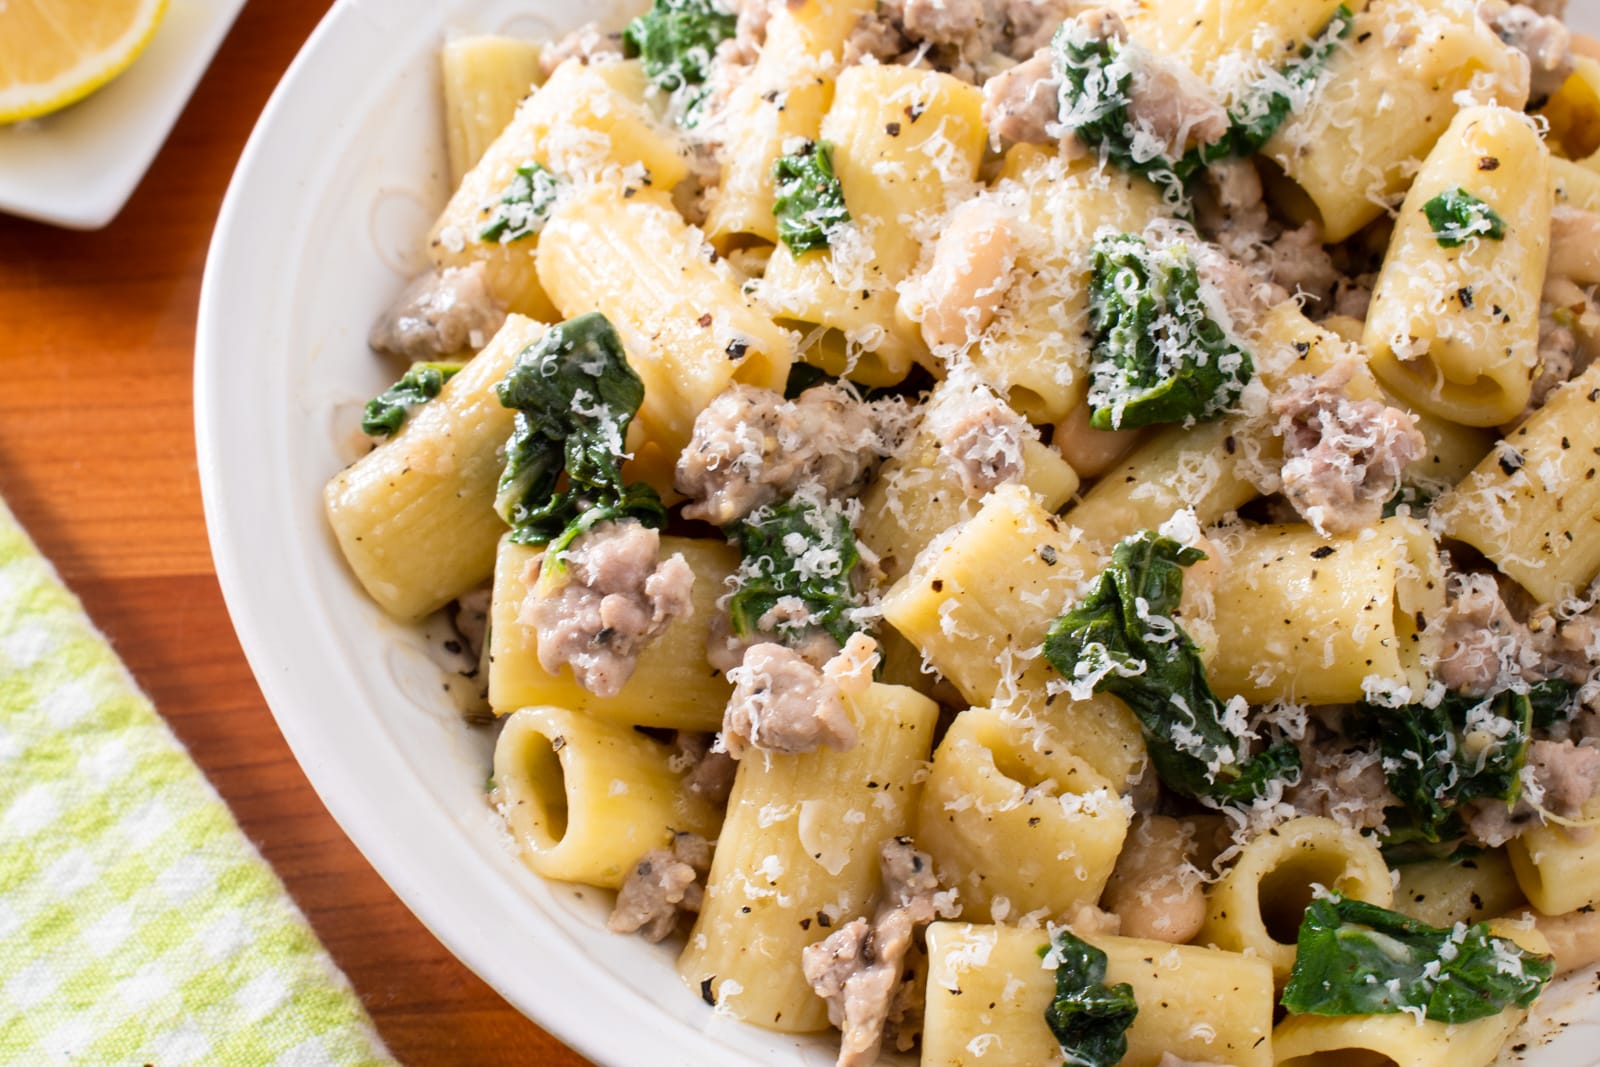 Rigatoni with Sausage, Beans and Greens